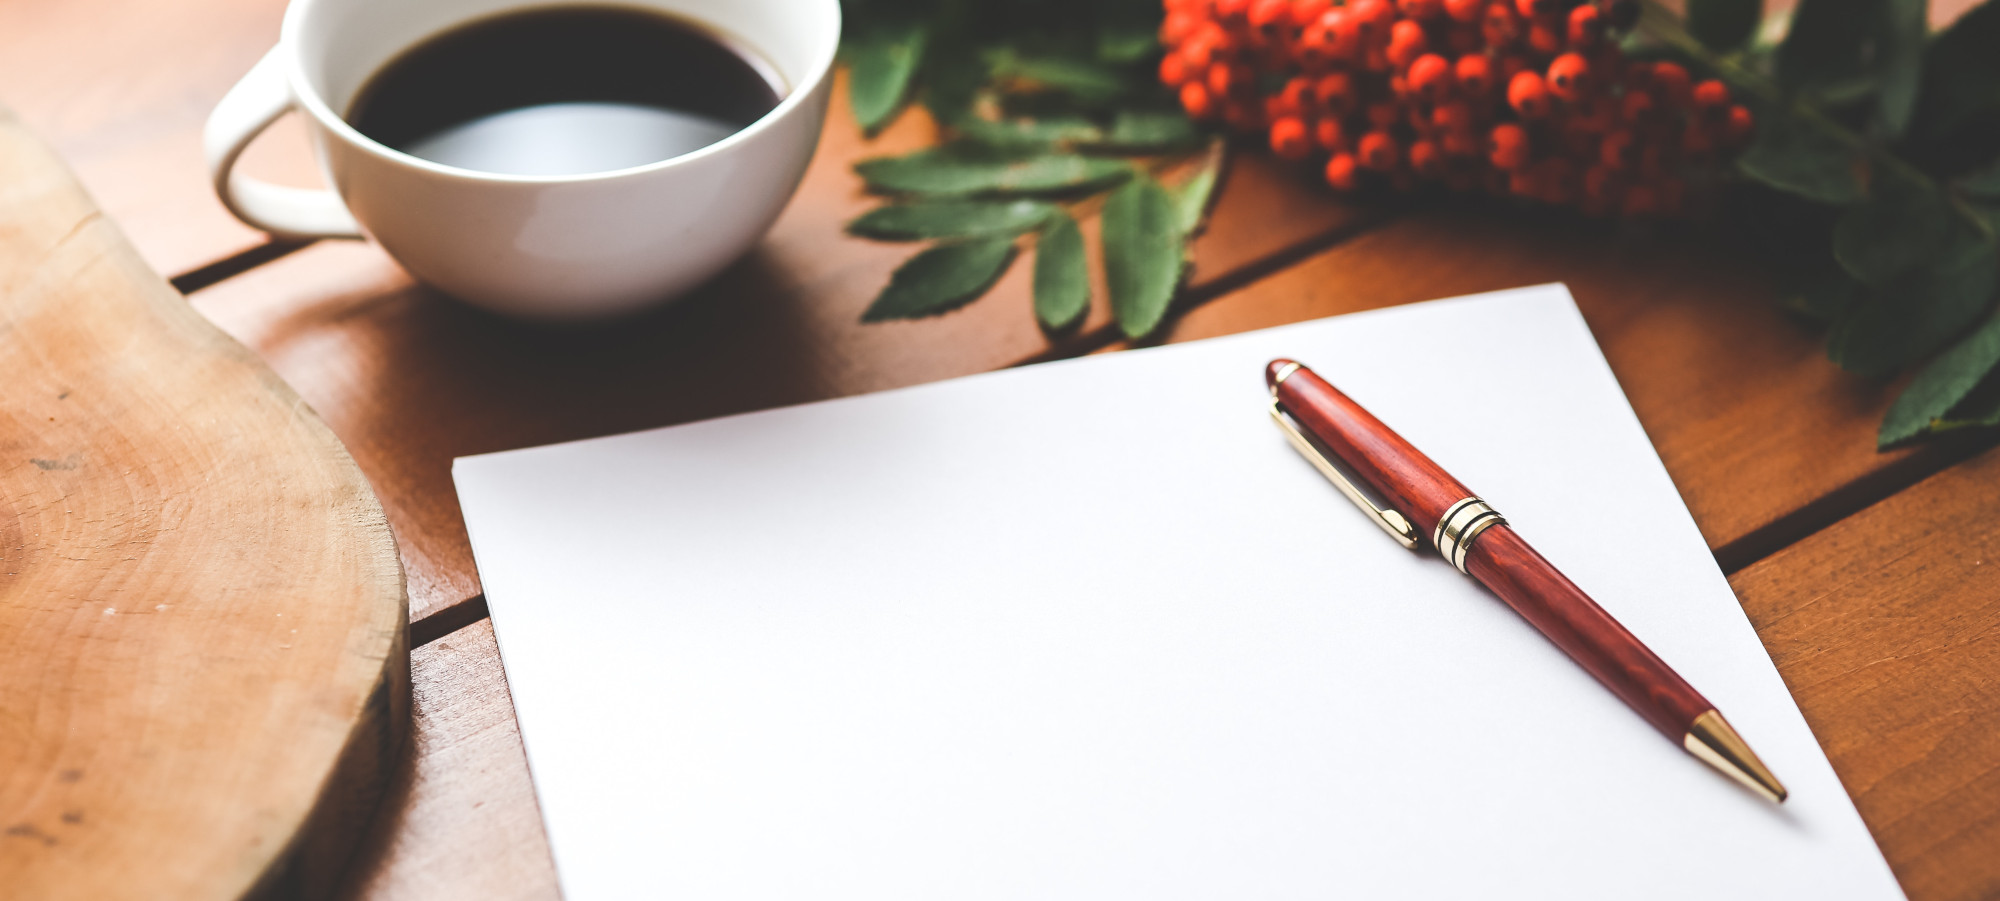 A stylish pen on top of a notebook next to a cup of coffee on a wooden table